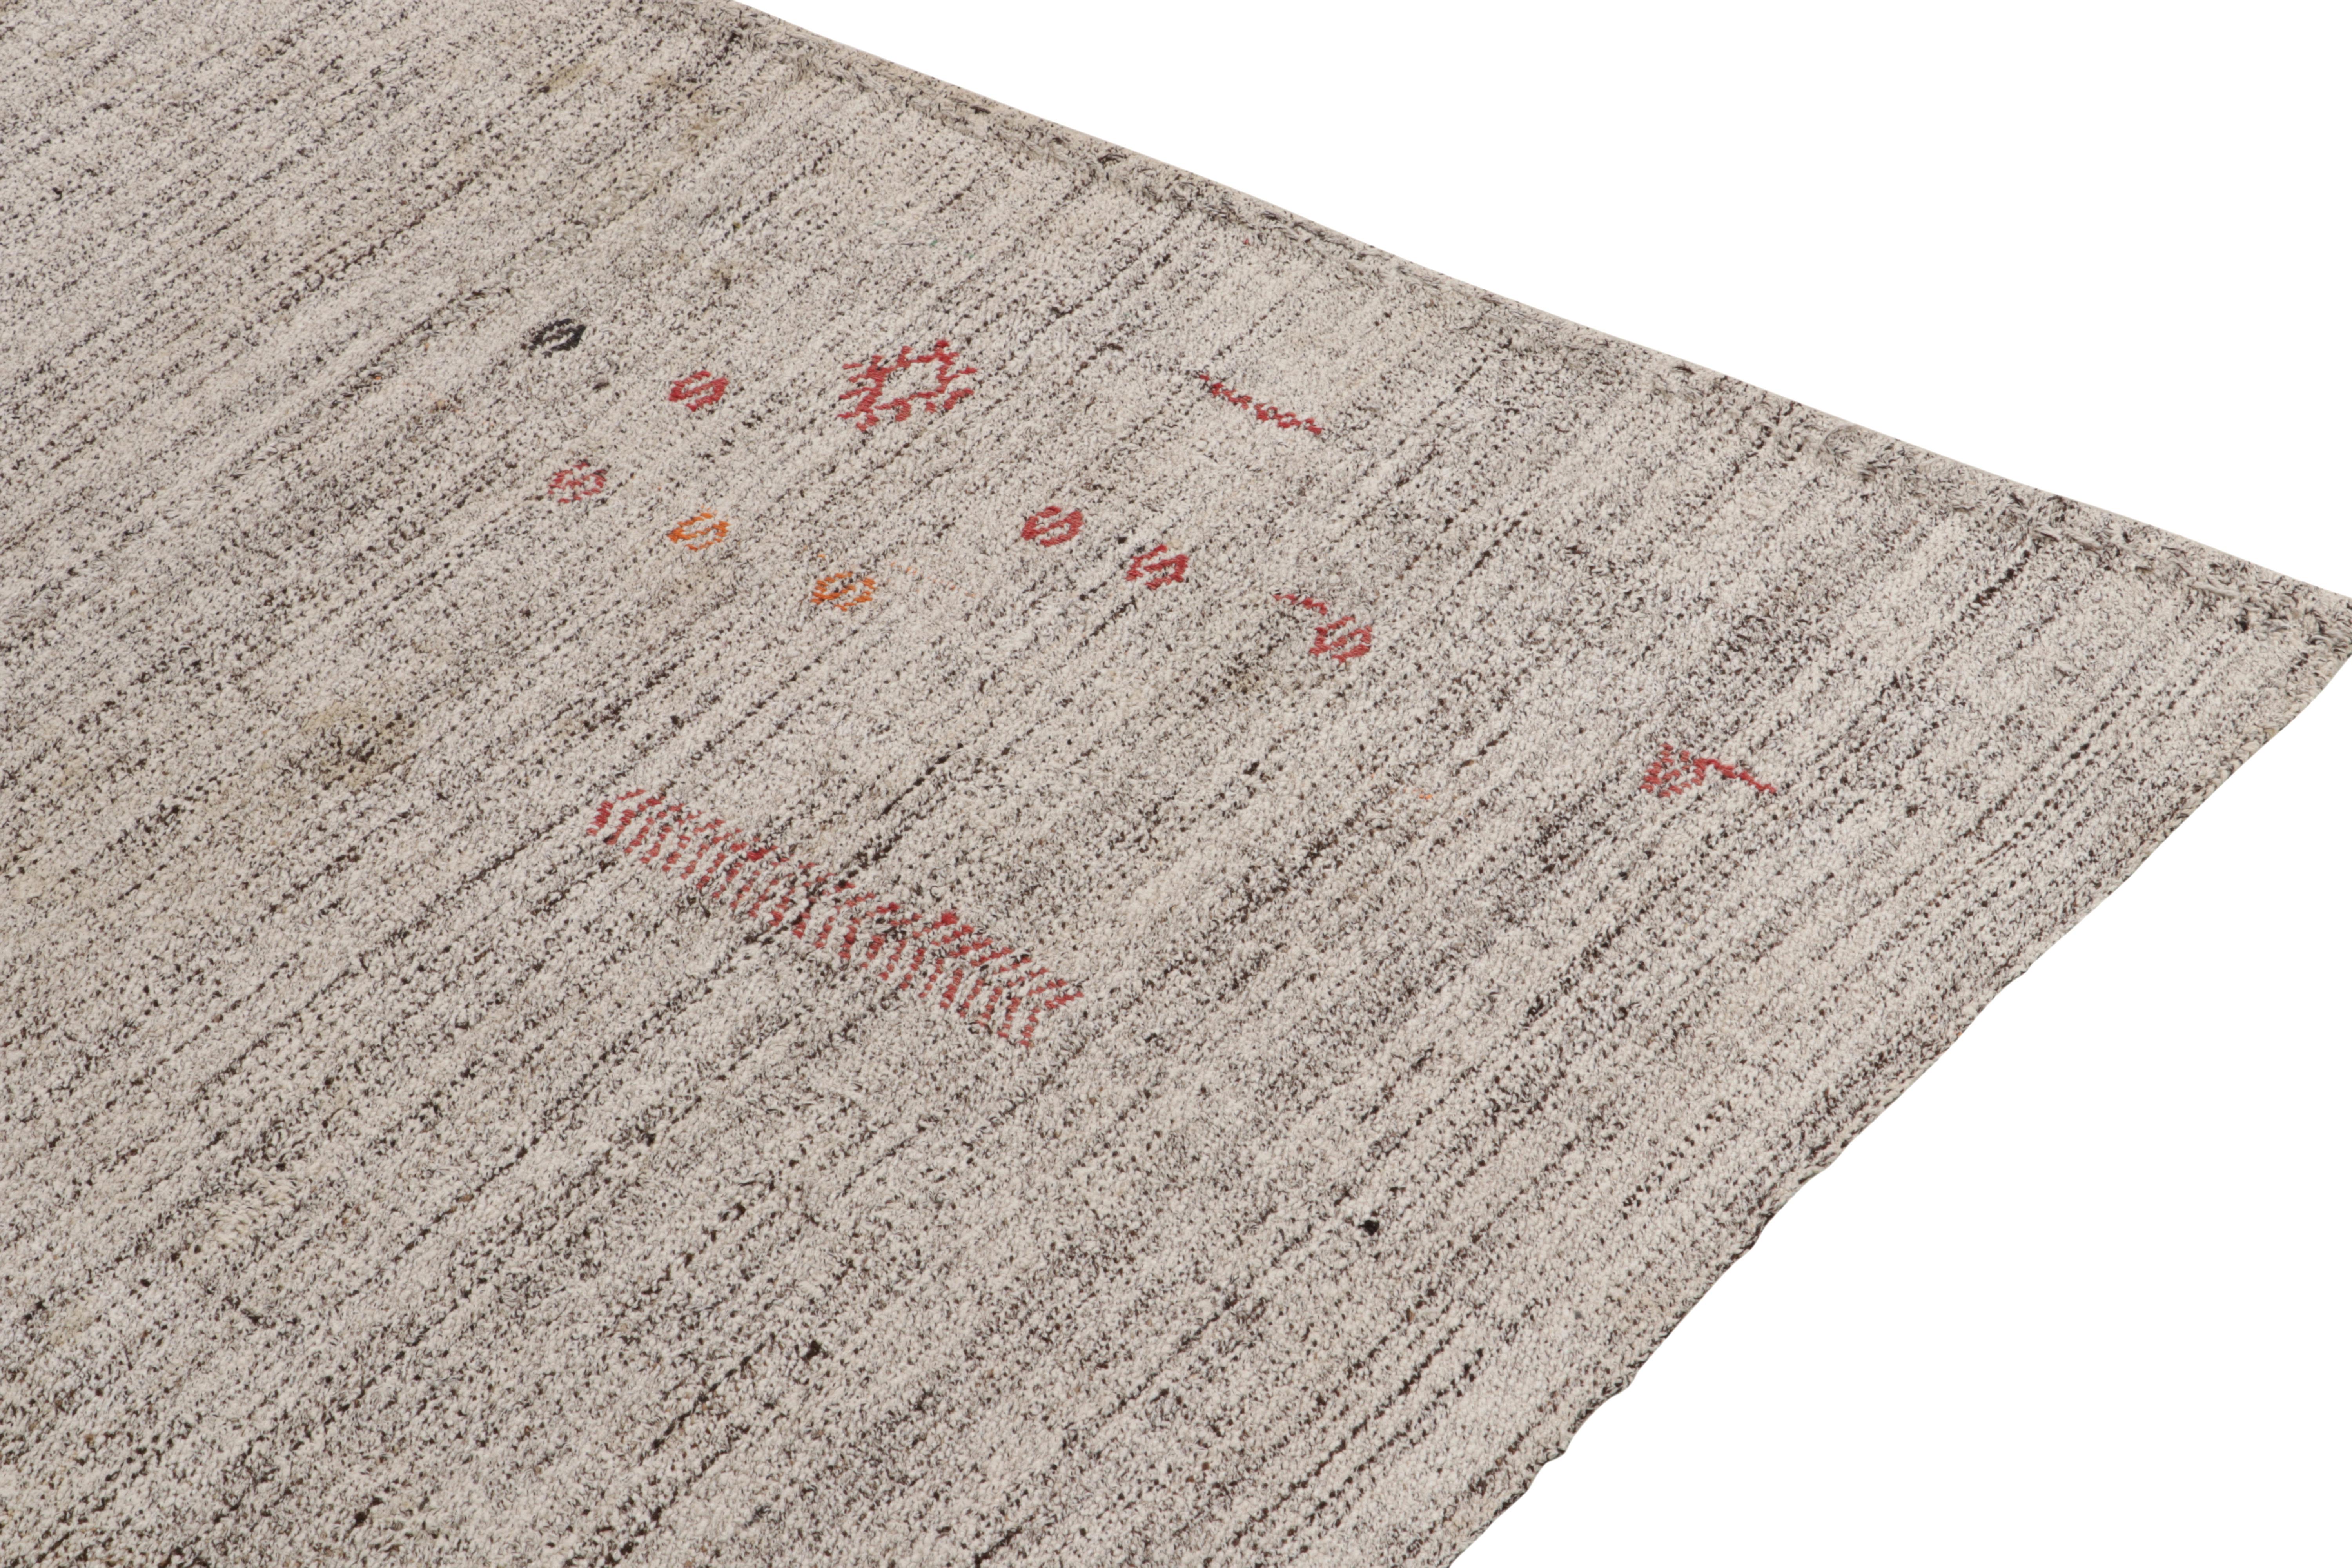 Rug & Kilim's Modern Kilim Striped Beige Gray and Green Transitional Flat-Weave In New Condition For Sale In Long Island City, NY